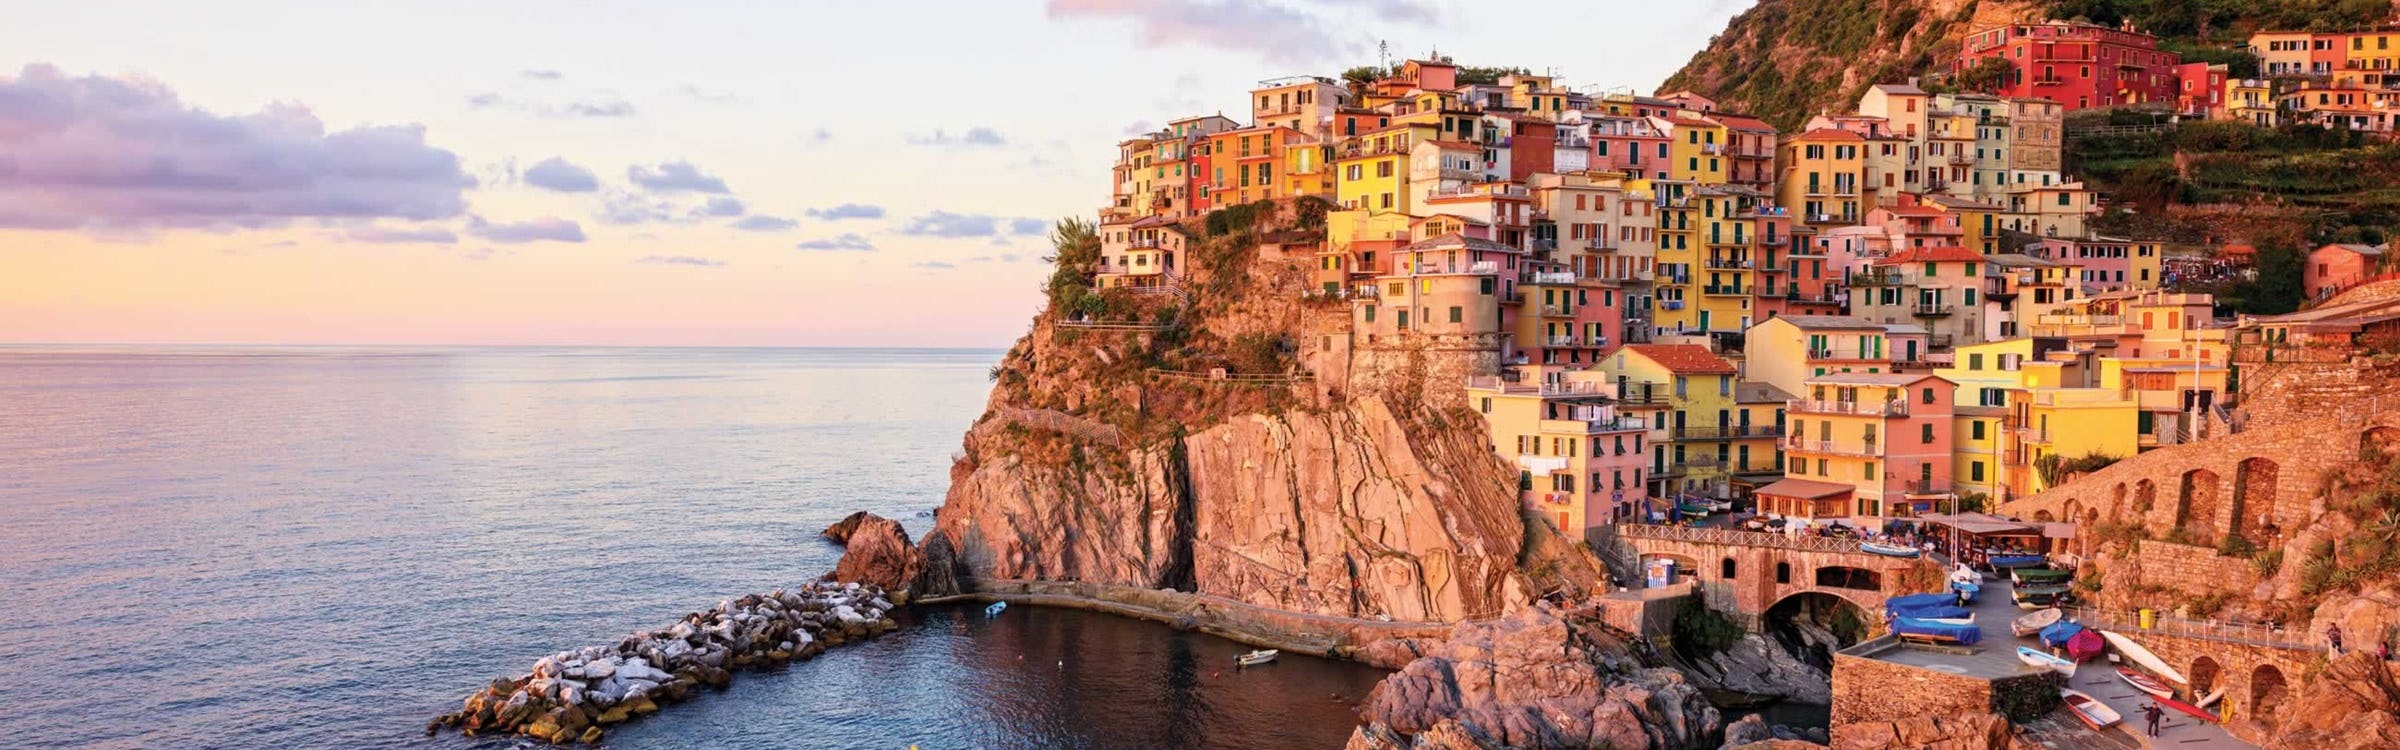 Cinque Terre seaside village in Italy at sunset